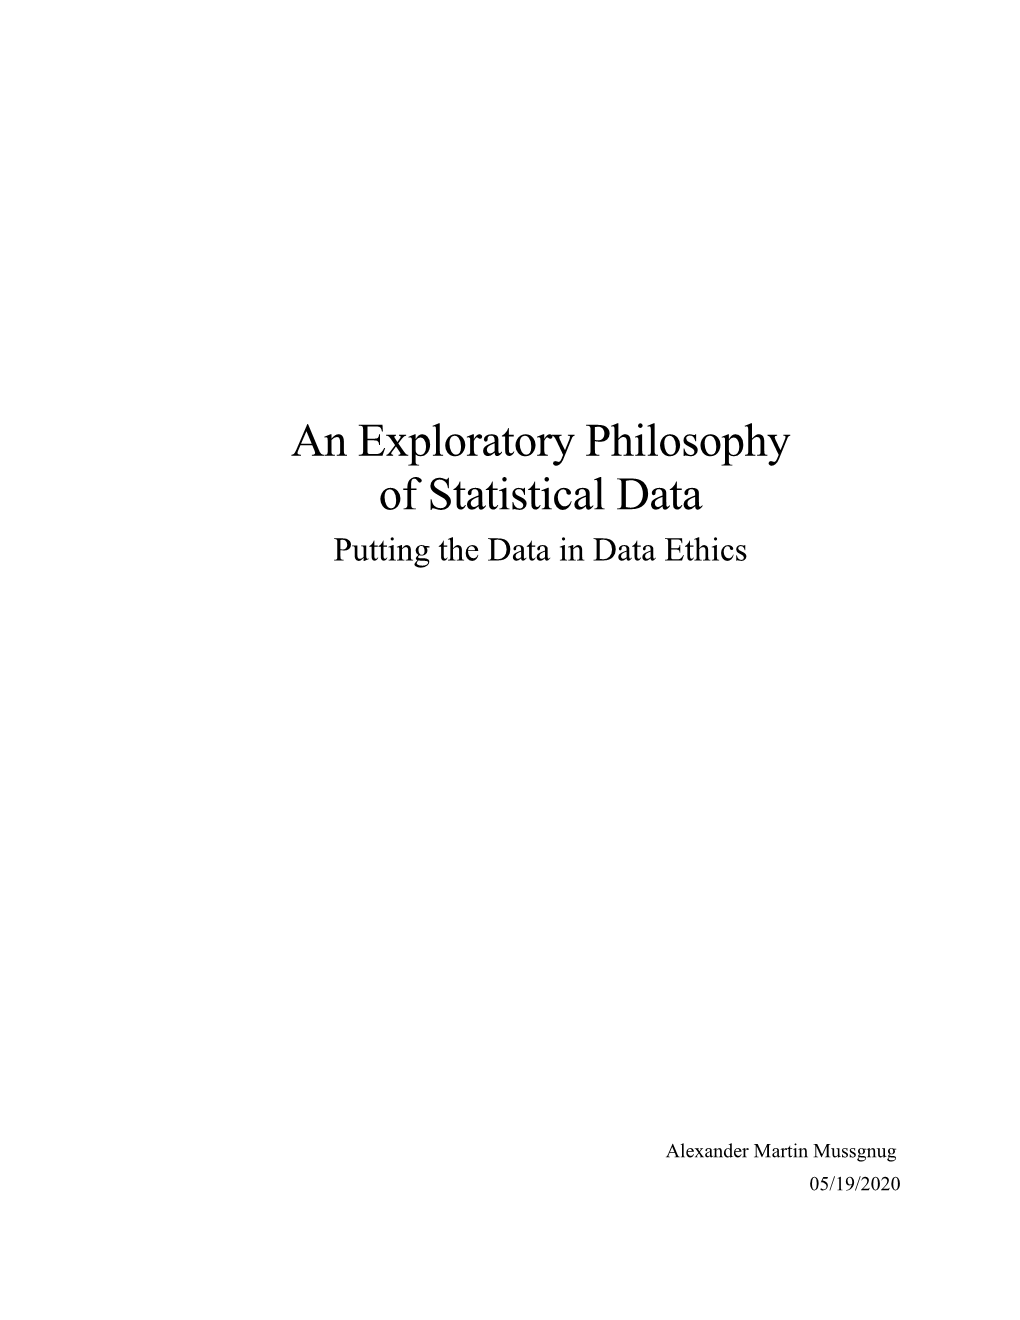 An Exploratory Philosophy of Statistical Data Putting the Data in Data Ethics